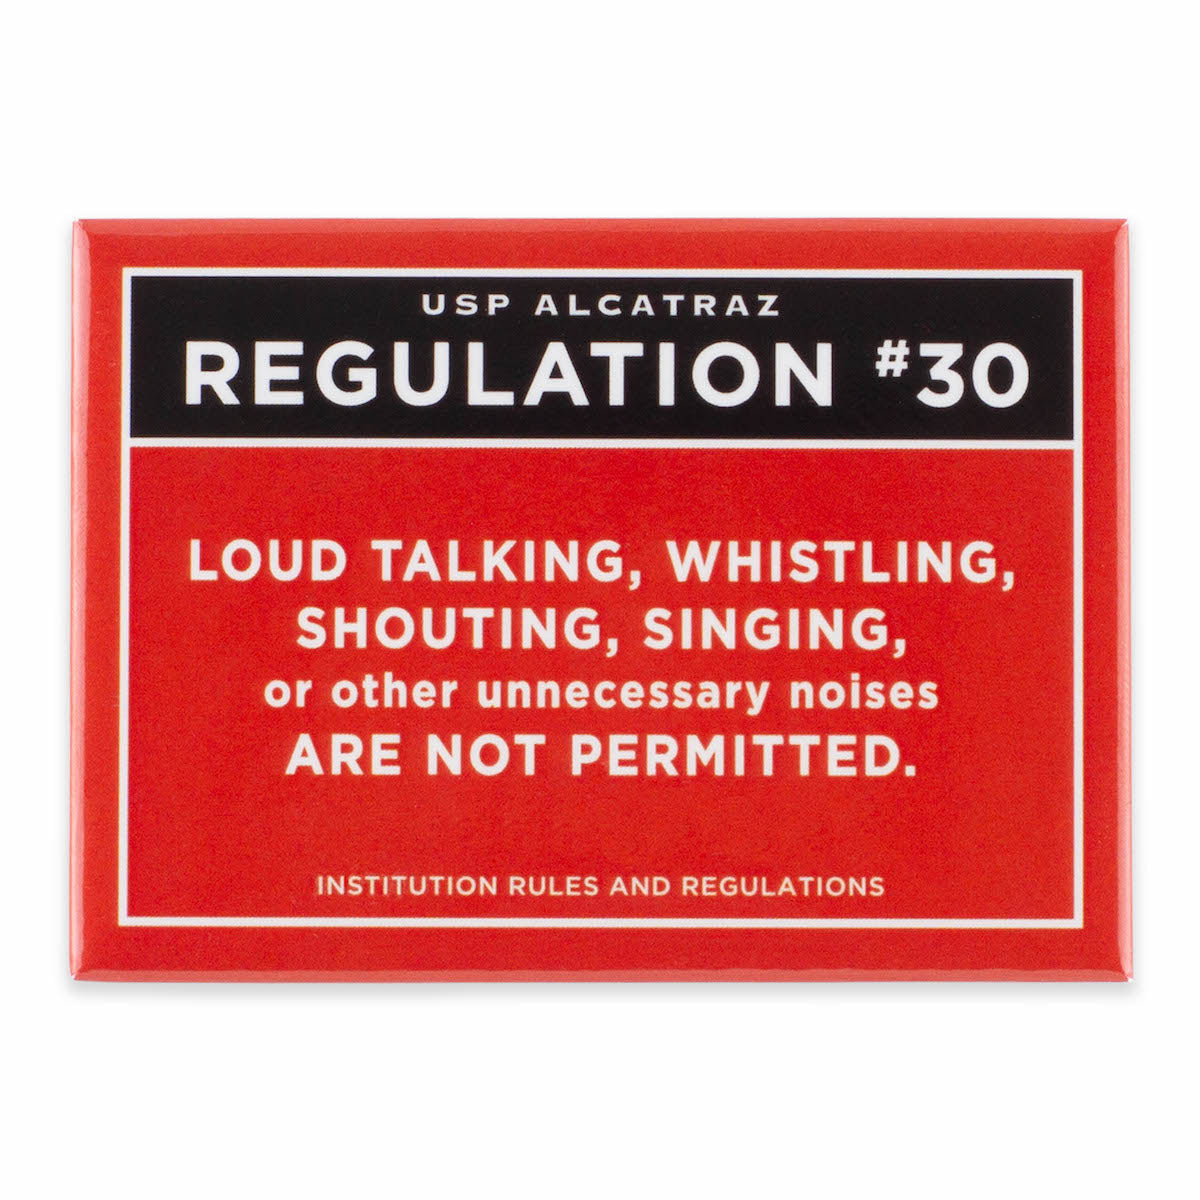 Rectangular red magnet with text from U.S. Penitentiary Alcatraz Regulation 30 in white, with black accent: “Loud talking, whistling, shouting, singing, or other unneccessary noises are not permitted.”